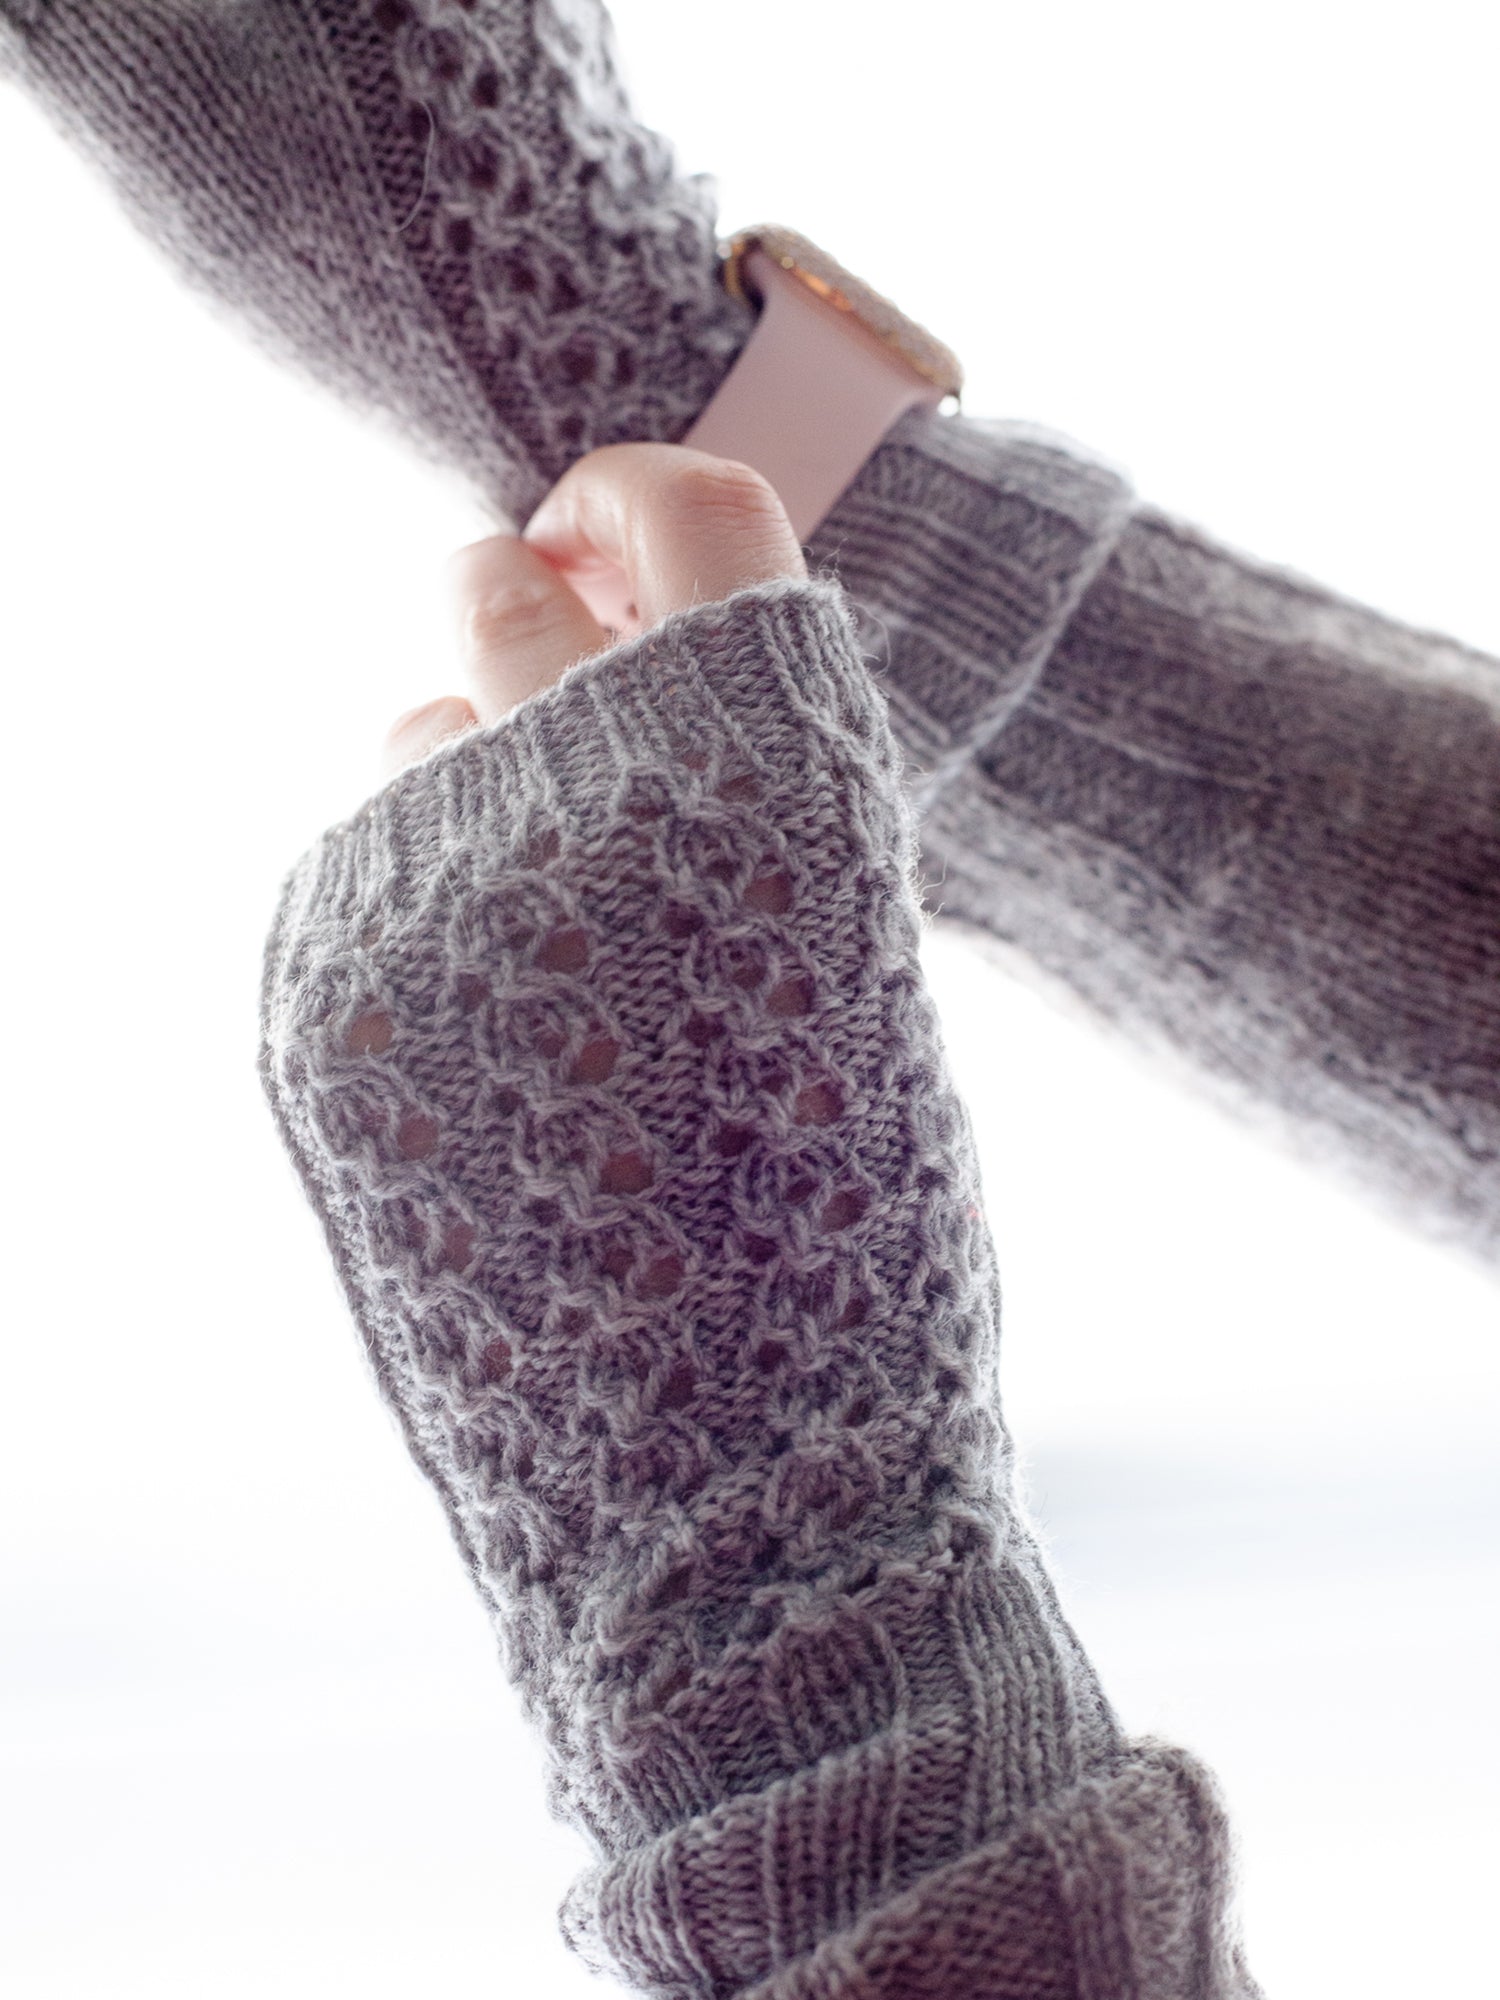 Cloverleaf Lace Mitts